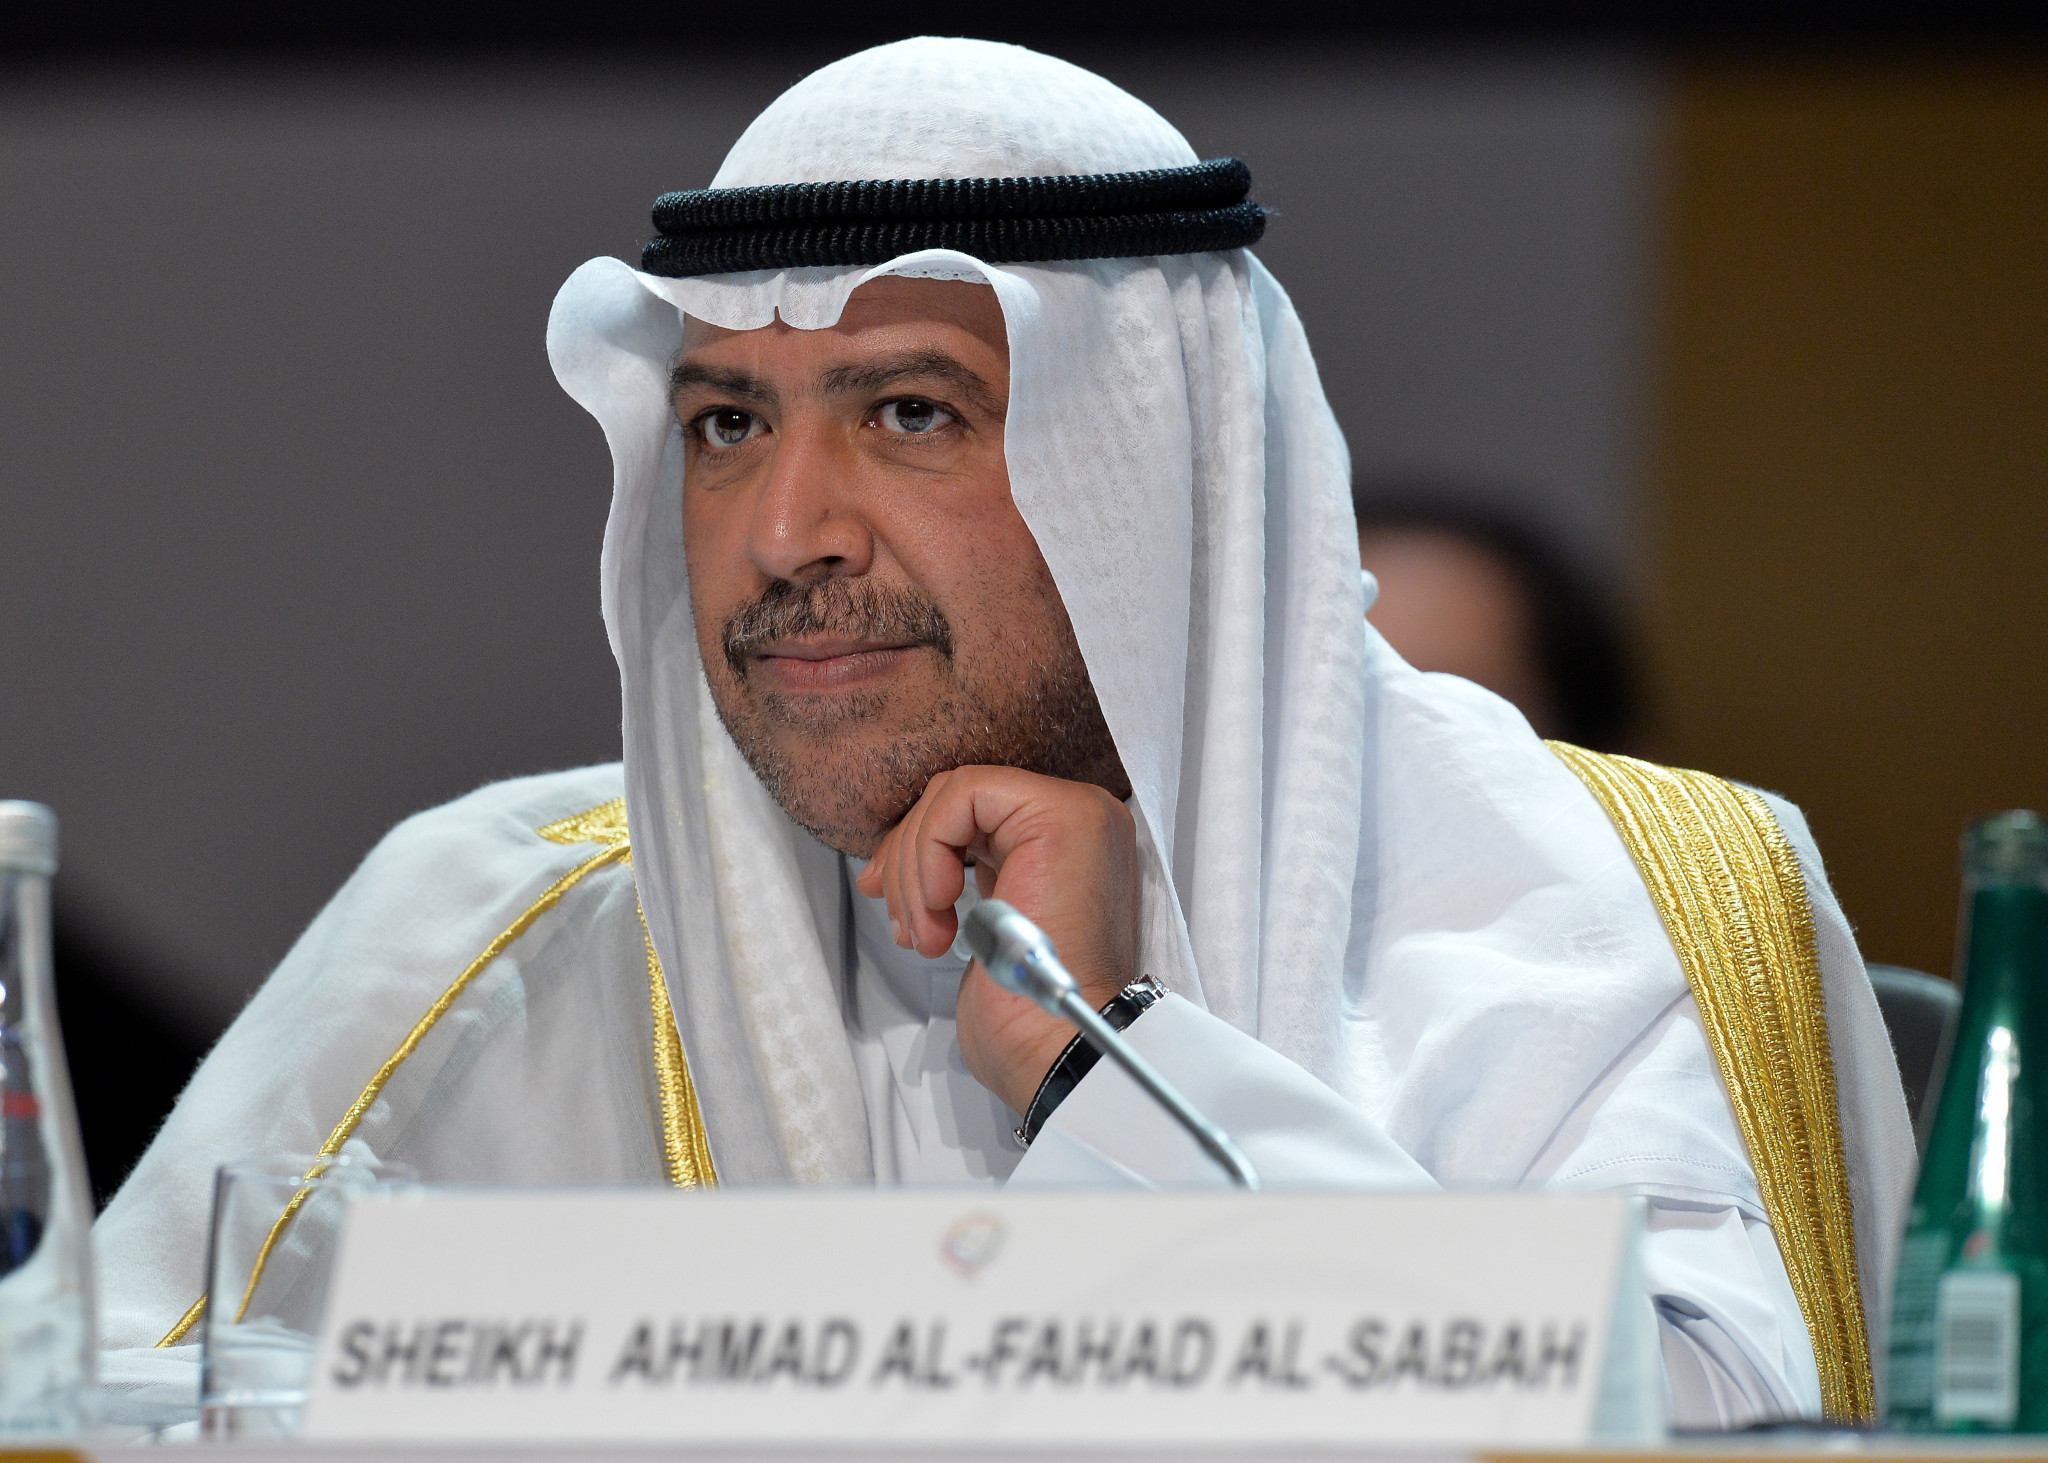 Sheikh Ahmad al-Fahad al-Sabah will have spent over a half-century on the IOC if he remains until the age of 80 ©Getty Images